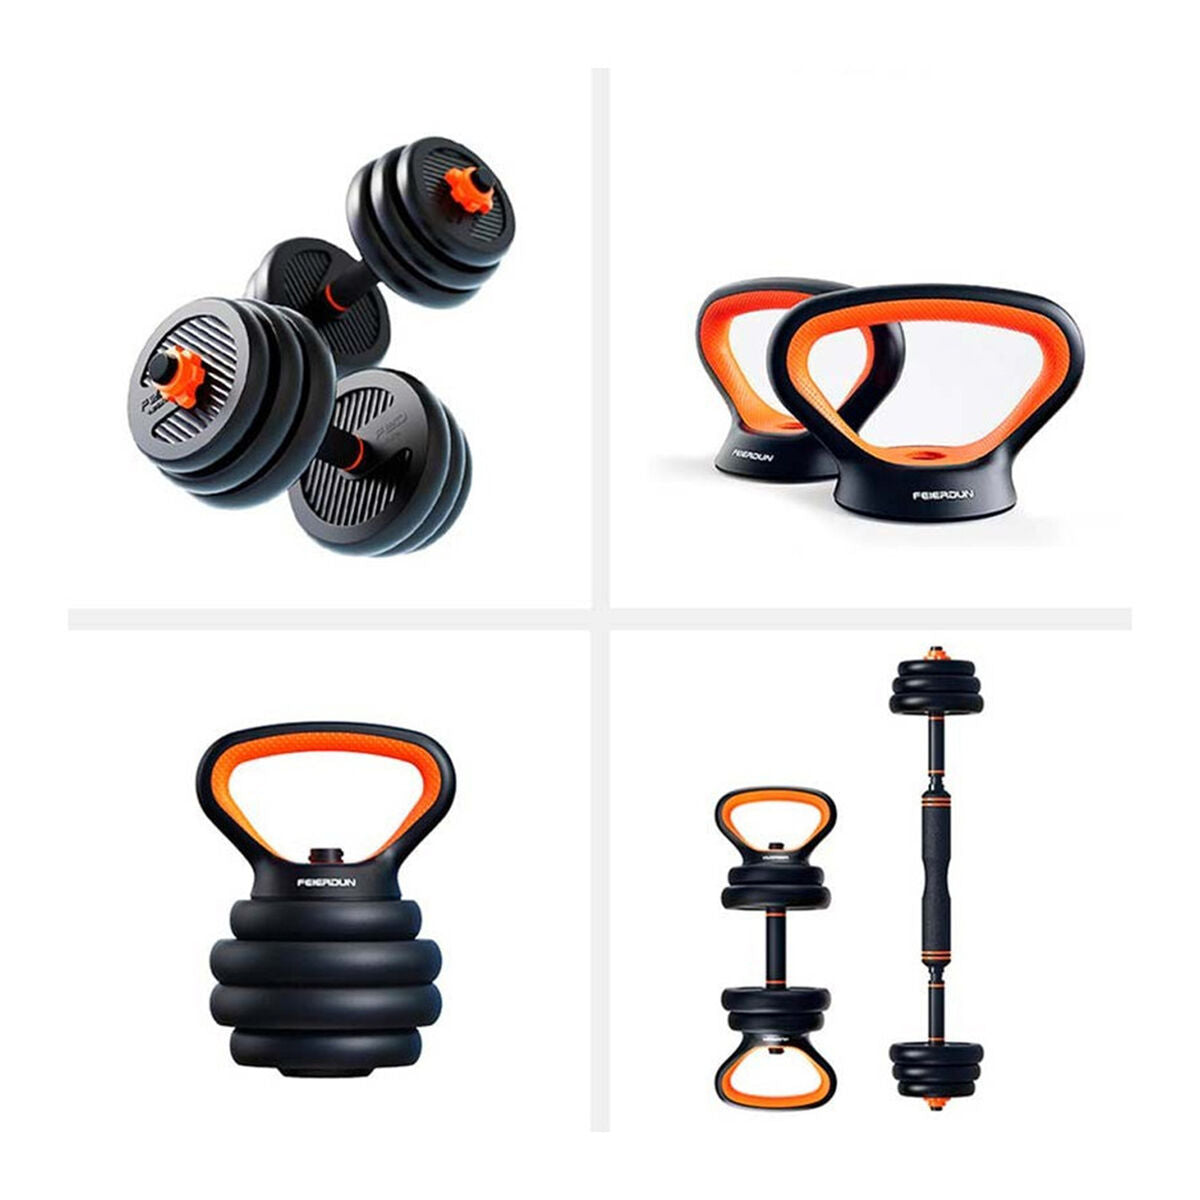 Kettlebell and Dumbbell Kit Xiaomi 10 Kg (Refurbished B)